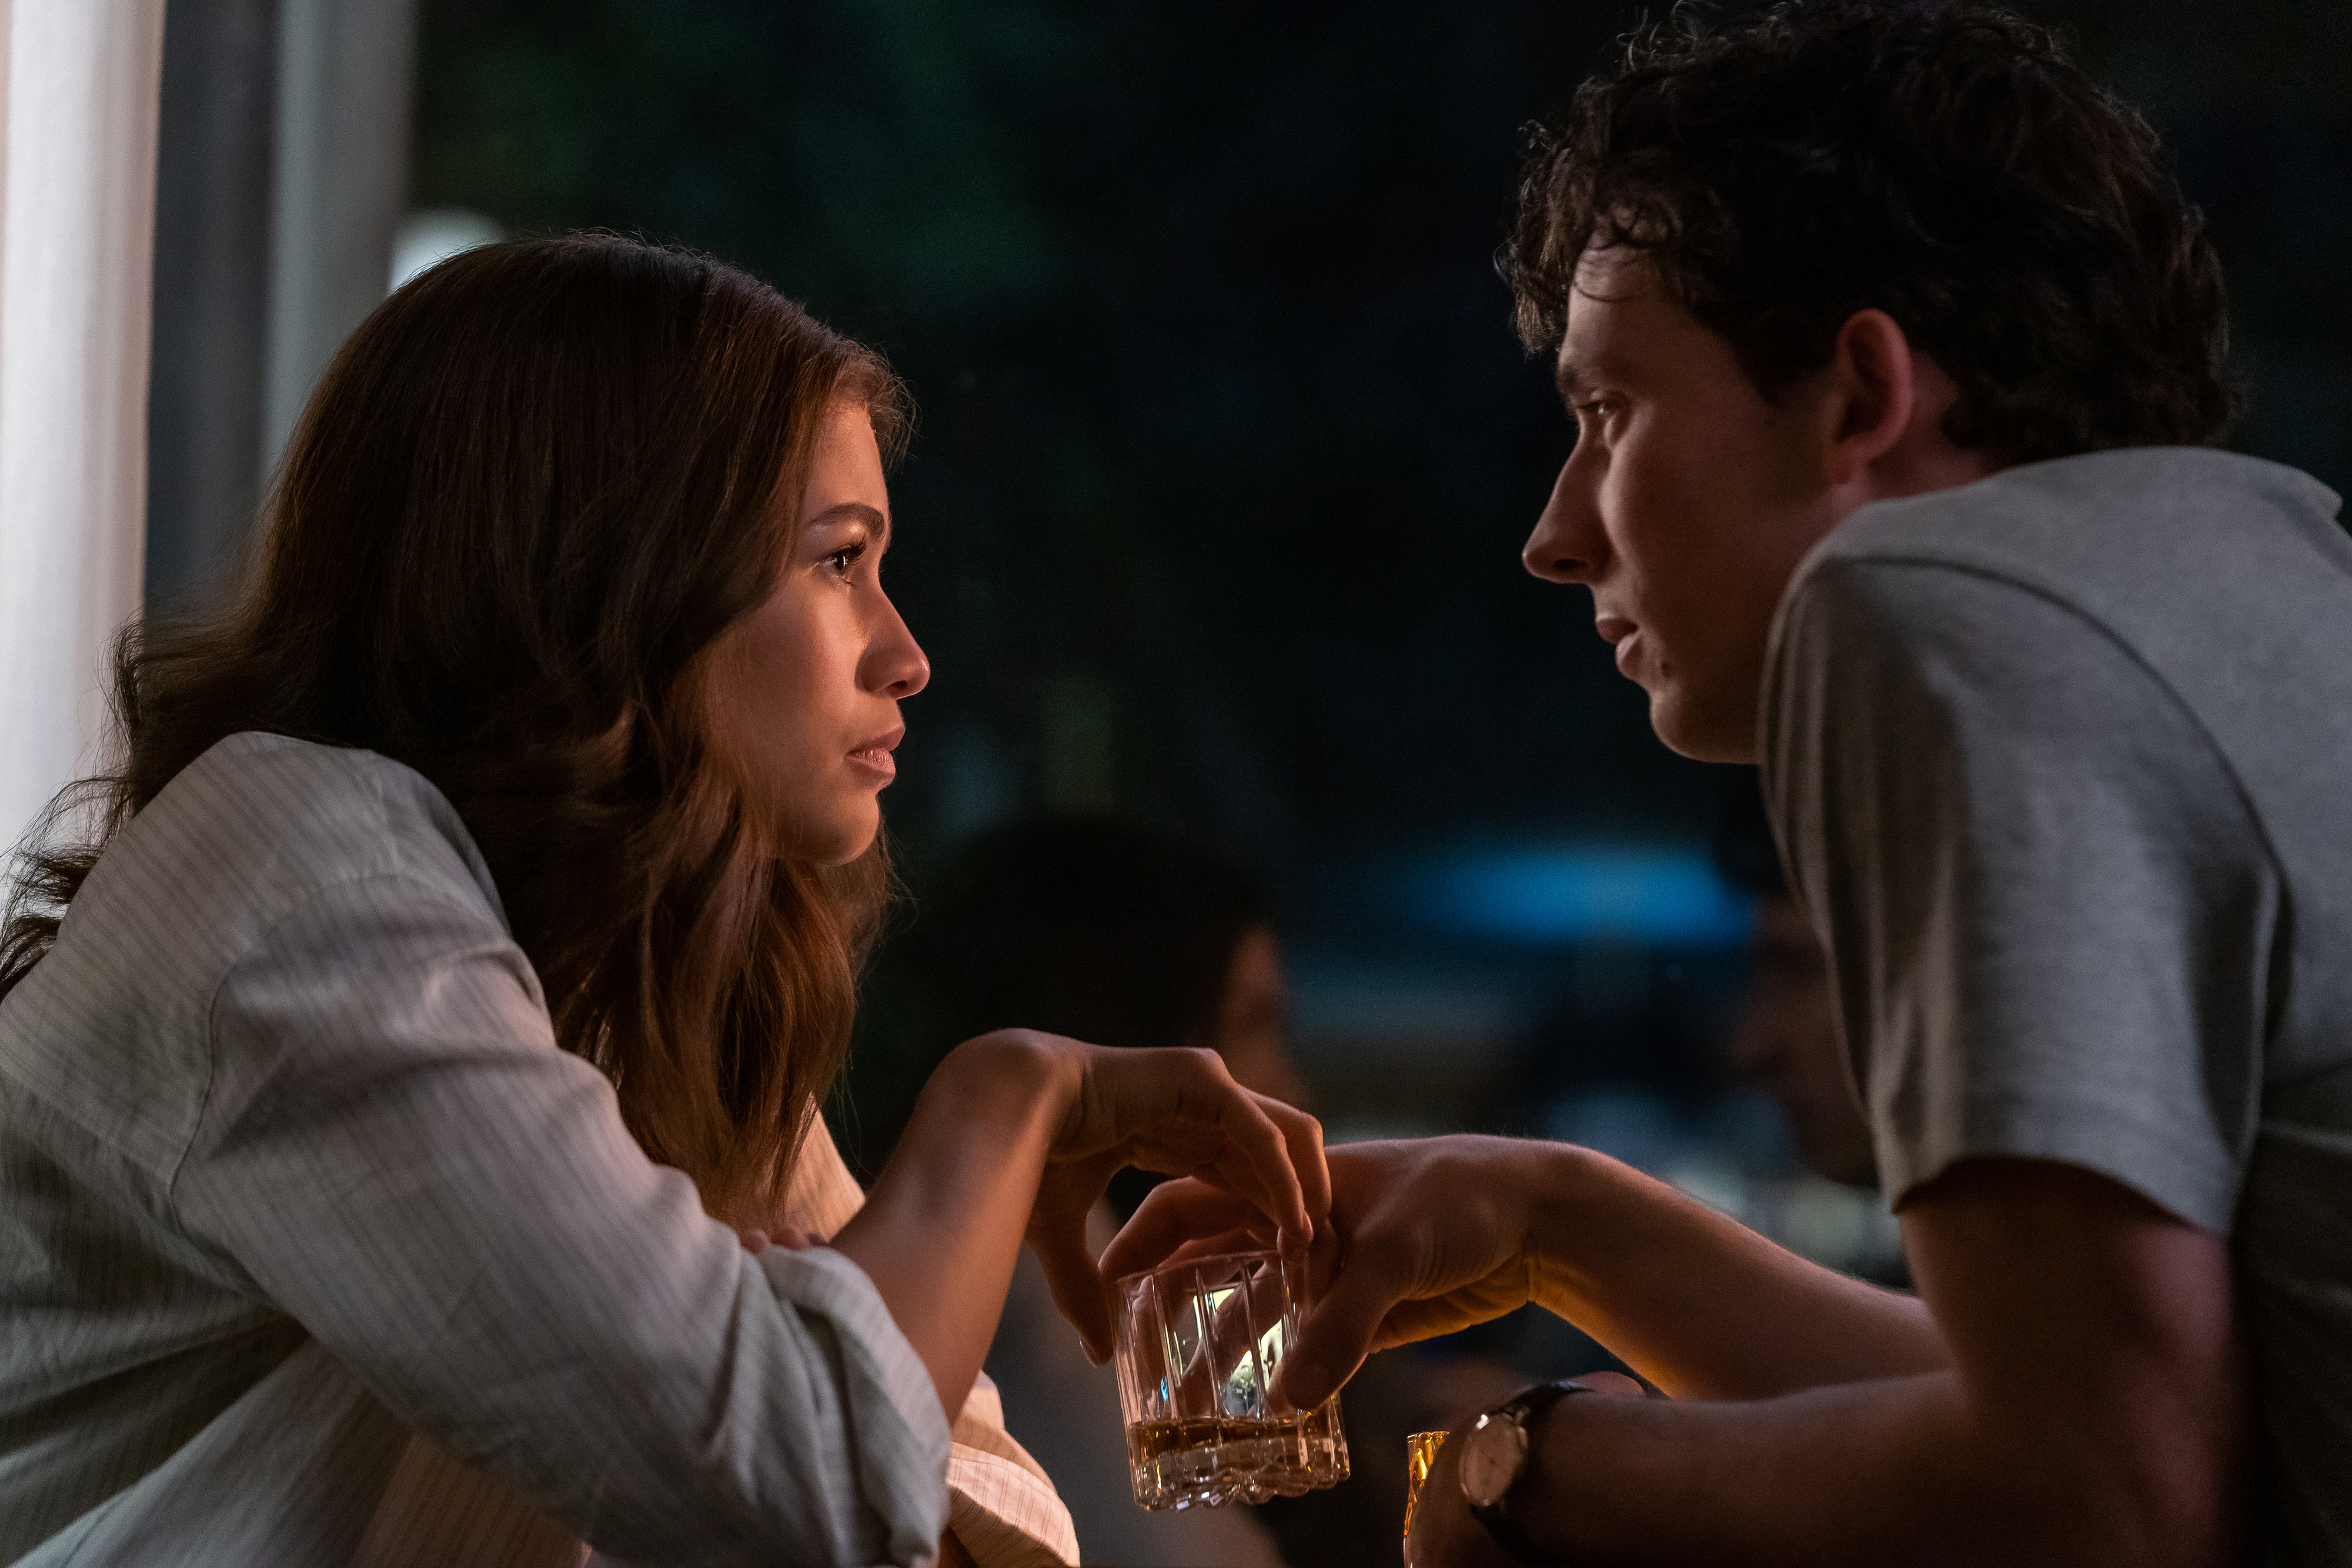 Two characters from a scene are engaged in a close, intense conversation over a drink